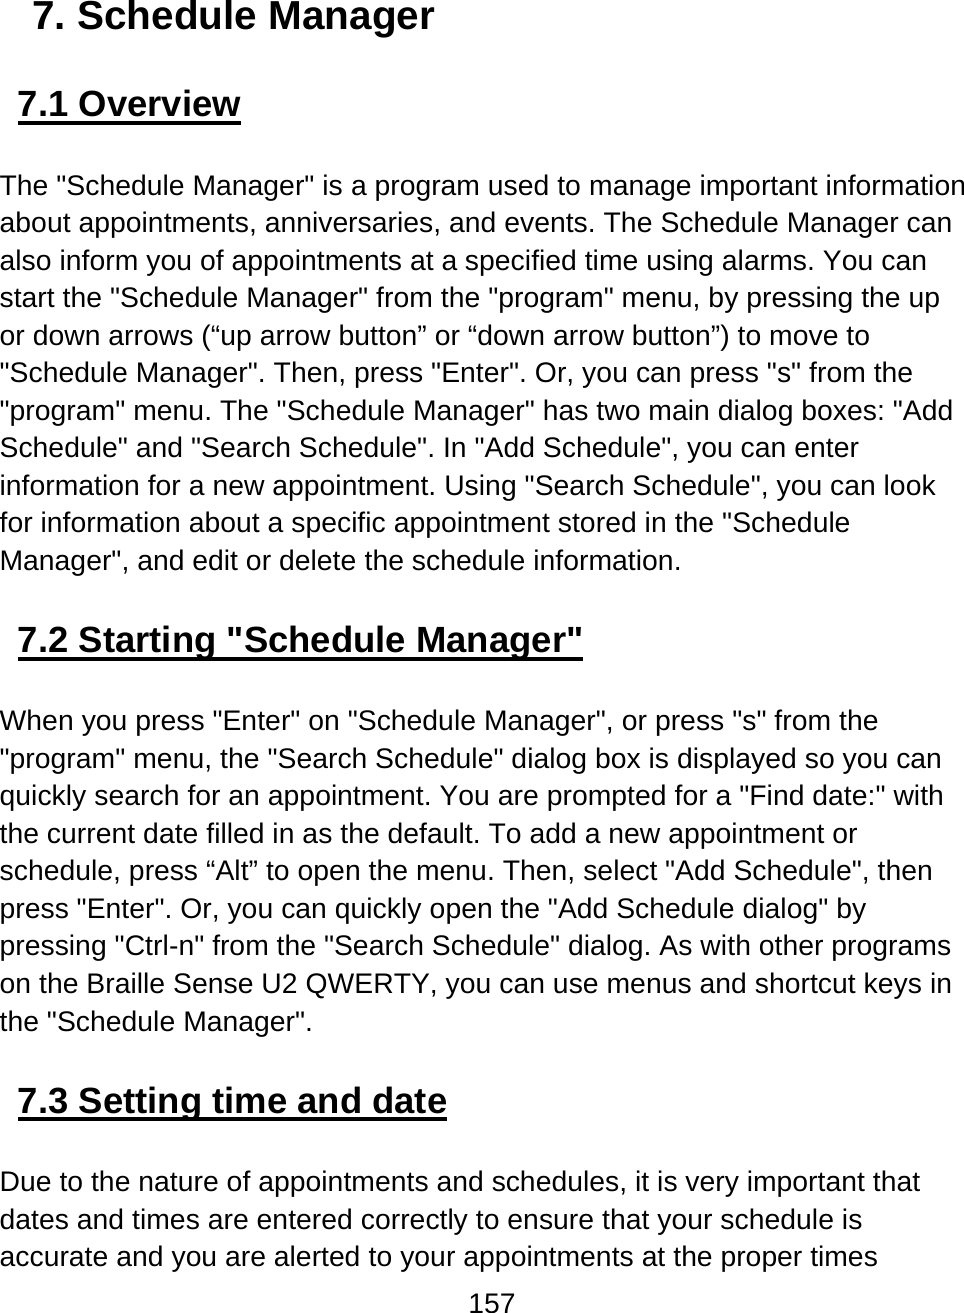 157  7. Schedule Manager  7.1 Overview  The &quot;Schedule Manager&quot; is a program used to manage important information about appointments, anniversaries, and events. The Schedule Manager can also inform you of appointments at a specified time using alarms. You can start the &quot;Schedule Manager&quot; from the &quot;program&quot; menu, by pressing the up or down arrows (“up arrow button” or “down arrow button”) to move to &quot;Schedule Manager&quot;. Then, press &quot;Enter&quot;. Or, you can press &quot;s&quot; from the &quot;program&quot; menu. The &quot;Schedule Manager&quot; has two main dialog boxes: &quot;Add Schedule&quot; and &quot;Search Schedule&quot;. In &quot;Add Schedule&quot;, you can enter information for a new appointment. Using &quot;Search Schedule&quot;, you can look for information about a specific appointment stored in the &quot;Schedule Manager&quot;, and edit or delete the schedule information.   7.2 Starting &quot;Schedule Manager&quot;  When you press &quot;Enter&quot; on &quot;Schedule Manager&quot;, or press &quot;s&quot; from the &quot;program&quot; menu, the &quot;Search Schedule&quot; dialog box is displayed so you can quickly search for an appointment. You are prompted for a &quot;Find date:&quot; with the current date filled in as the default. To add a new appointment or schedule, press “Alt” to open the menu. Then, select &quot;Add Schedule&quot;, then press &quot;Enter&quot;. Or, you can quickly open the &quot;Add Schedule dialog&quot; by pressing &quot;Ctrl-n&quot; from the &quot;Search Schedule&quot; dialog. As with other programs on the Braille Sense U2 QWERTY, you can use menus and shortcut keys in the &quot;Schedule Manager&quot;.   7.3 Setting time and date  Due to the nature of appointments and schedules, it is very important that dates and times are entered correctly to ensure that your schedule is accurate and you are alerted to your appointments at the proper times 